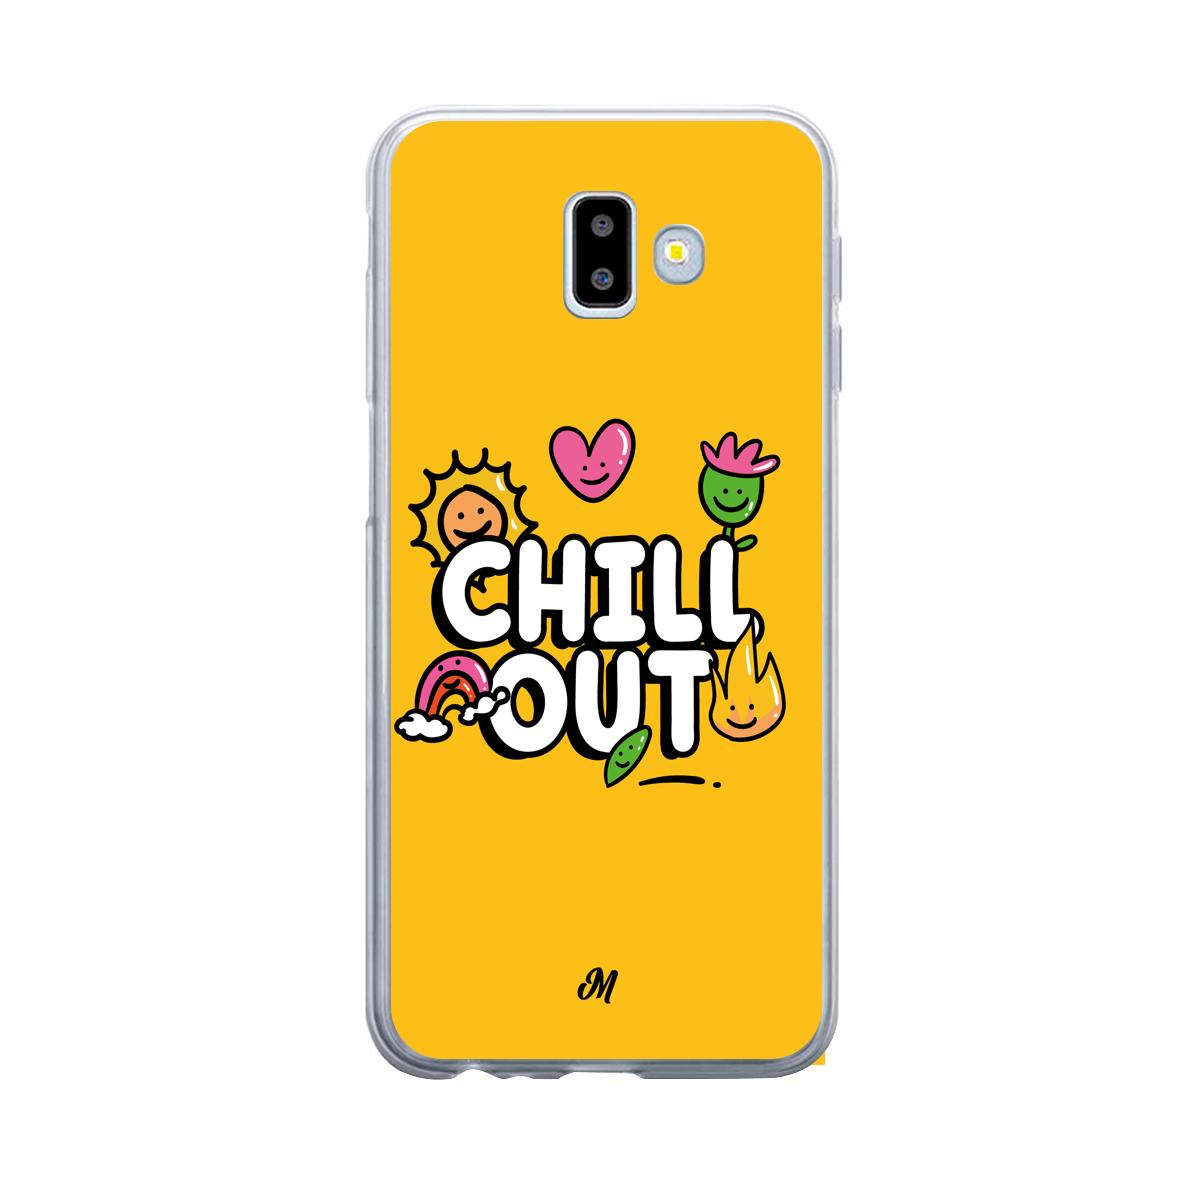 Cases para Samsung J6 Plus CHILL OUT - Mandala Cases